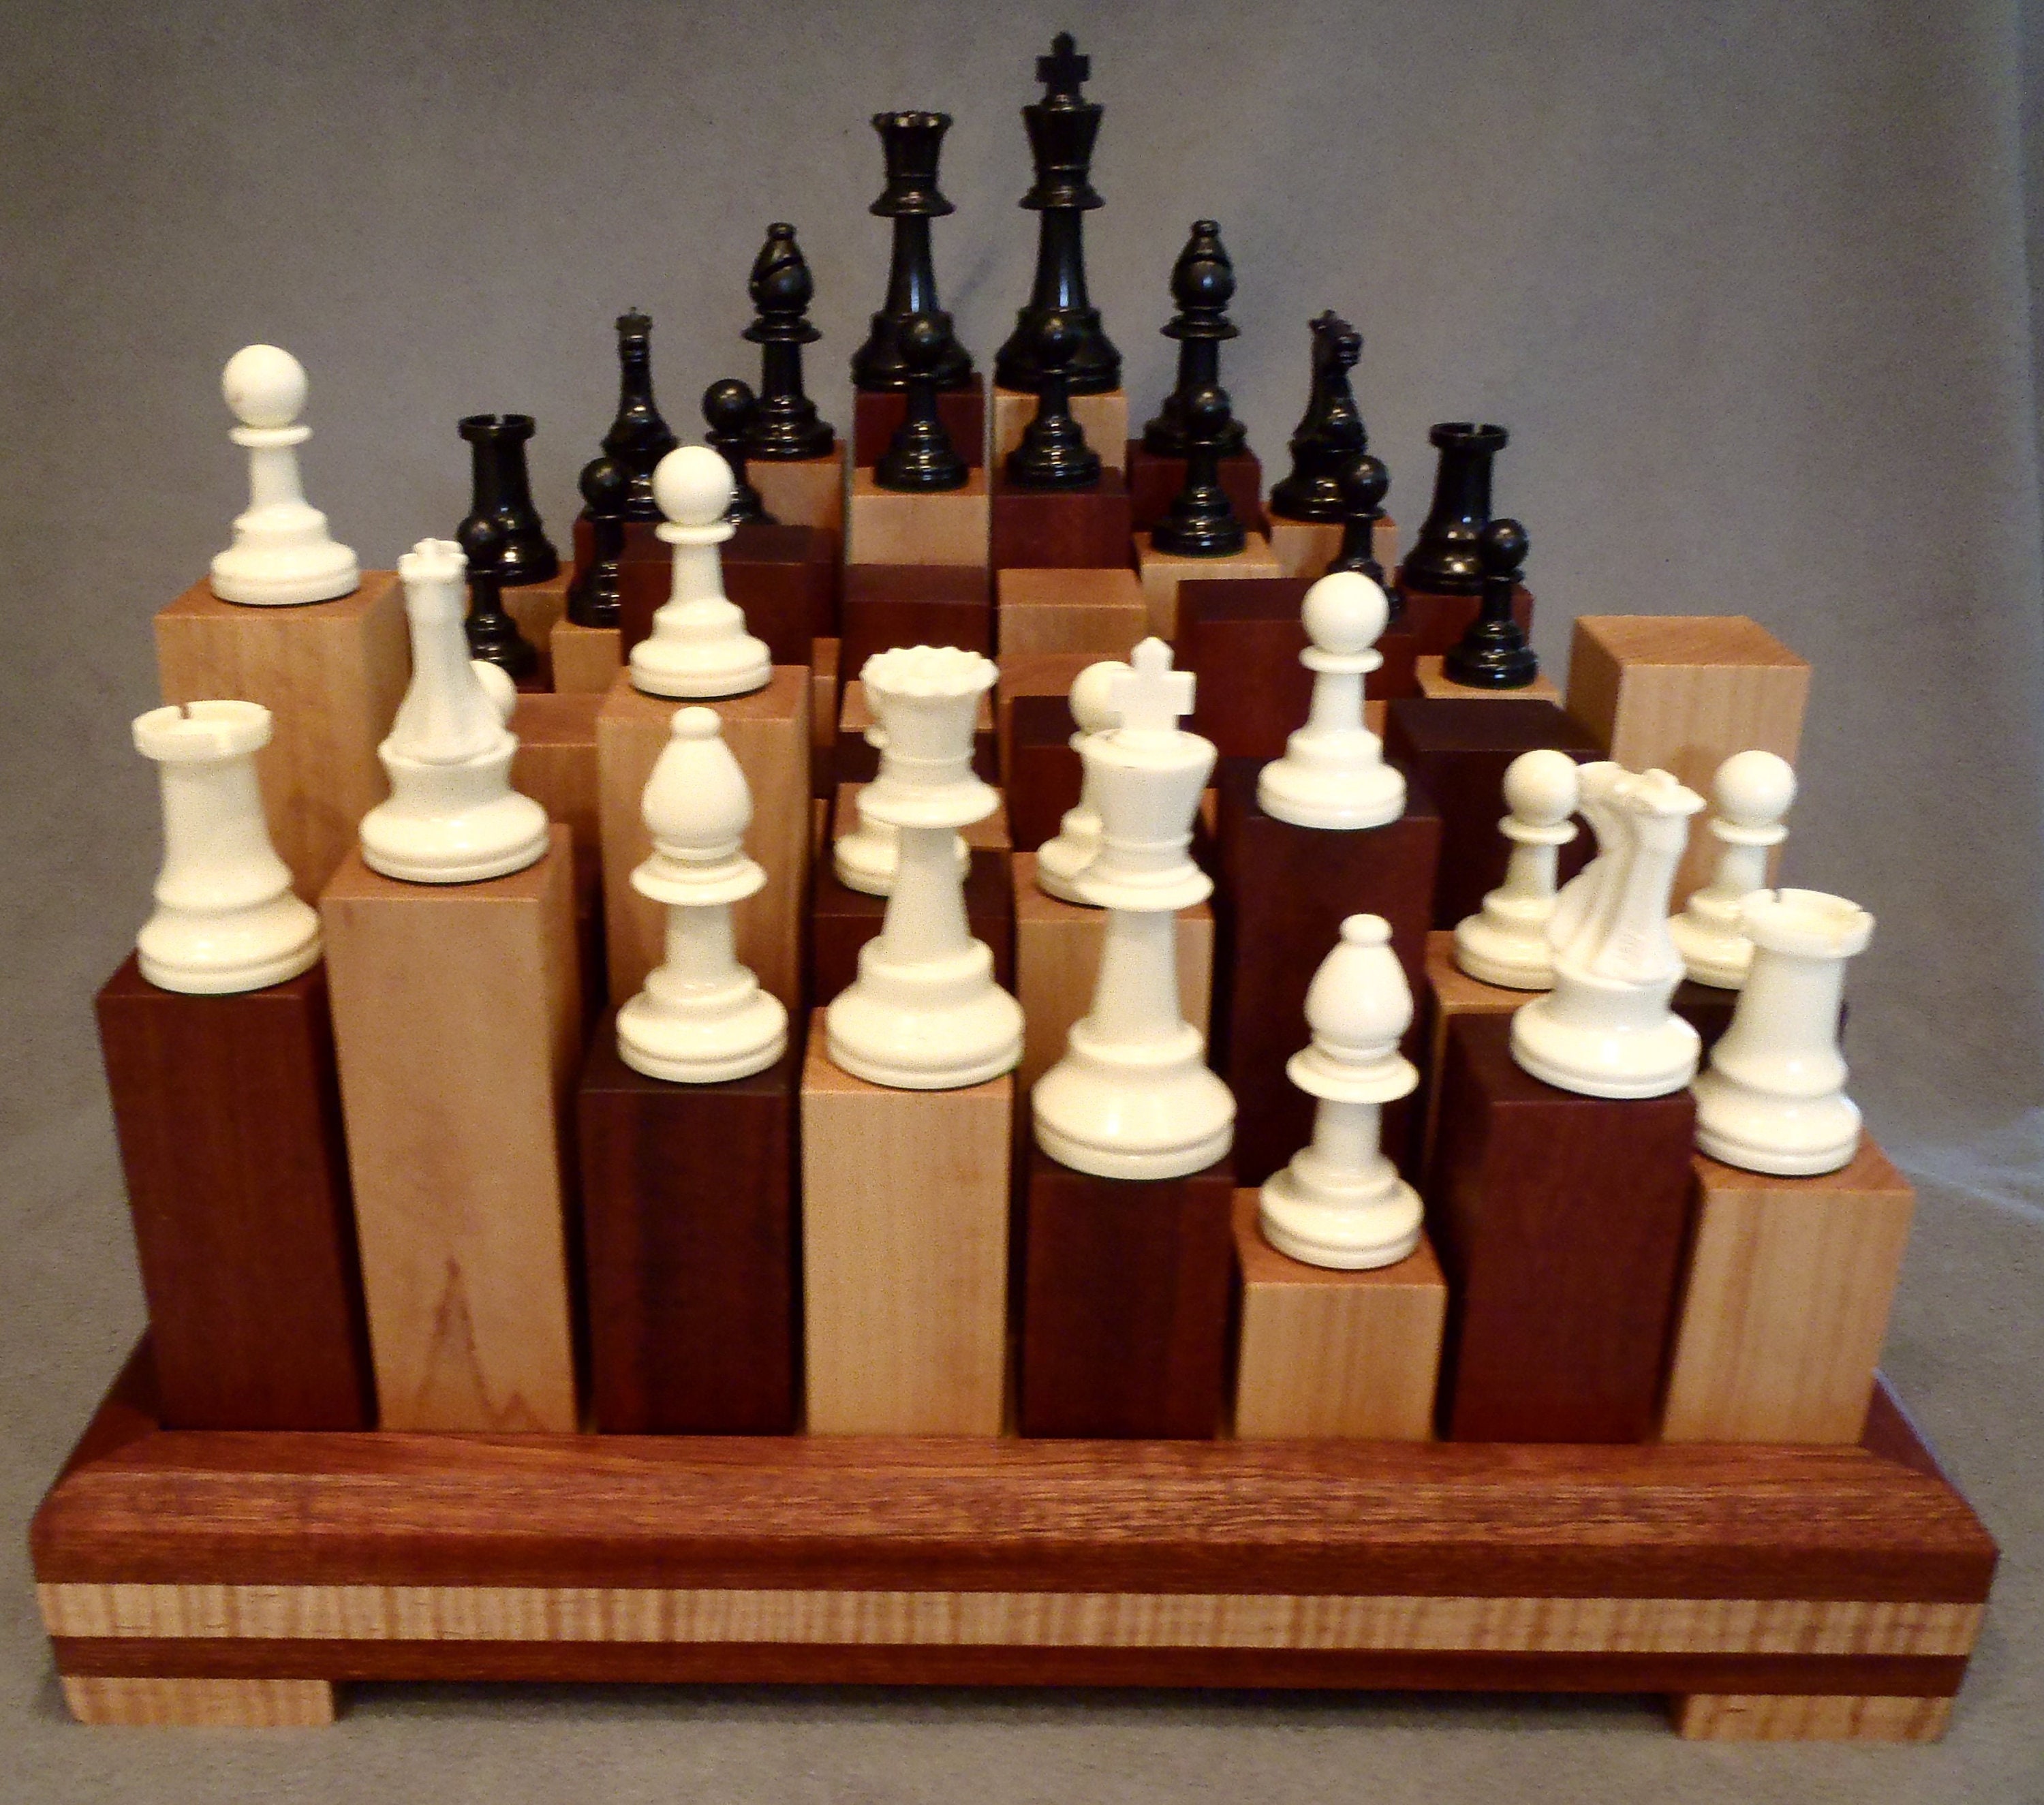 Play Chess at the Next Level With the Adjustable 3D Chess Board Confuse  Your Opponent Change the Home Décor Display the Queen's Gambit 